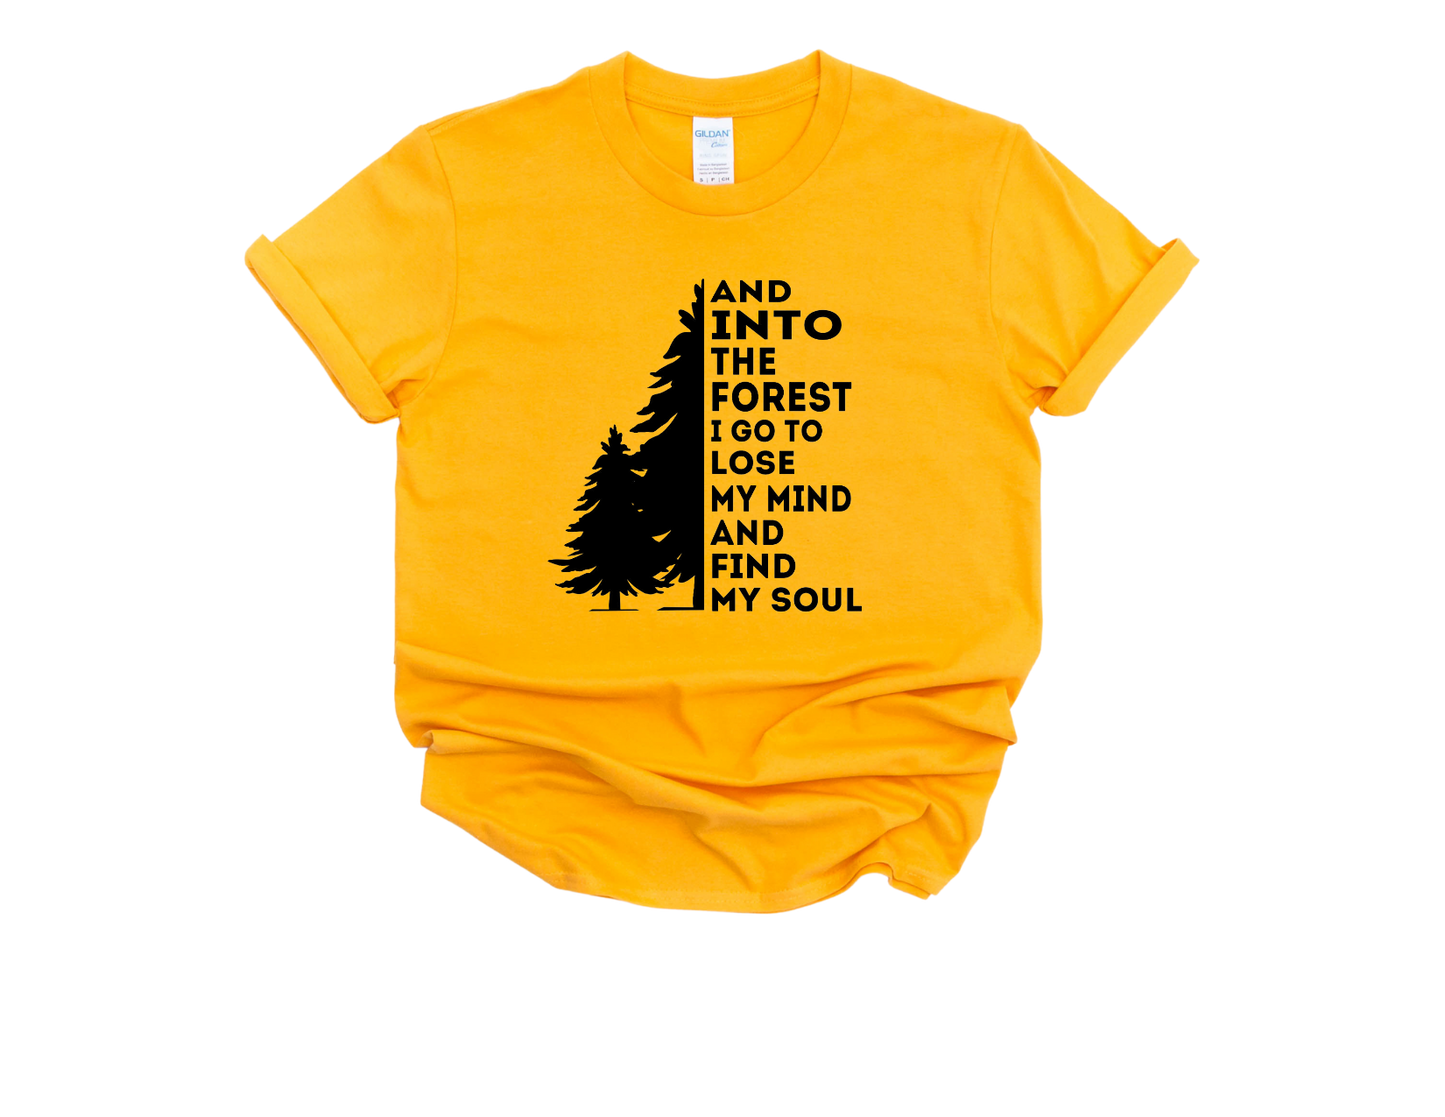 Into The Forest I Go T-Shirt